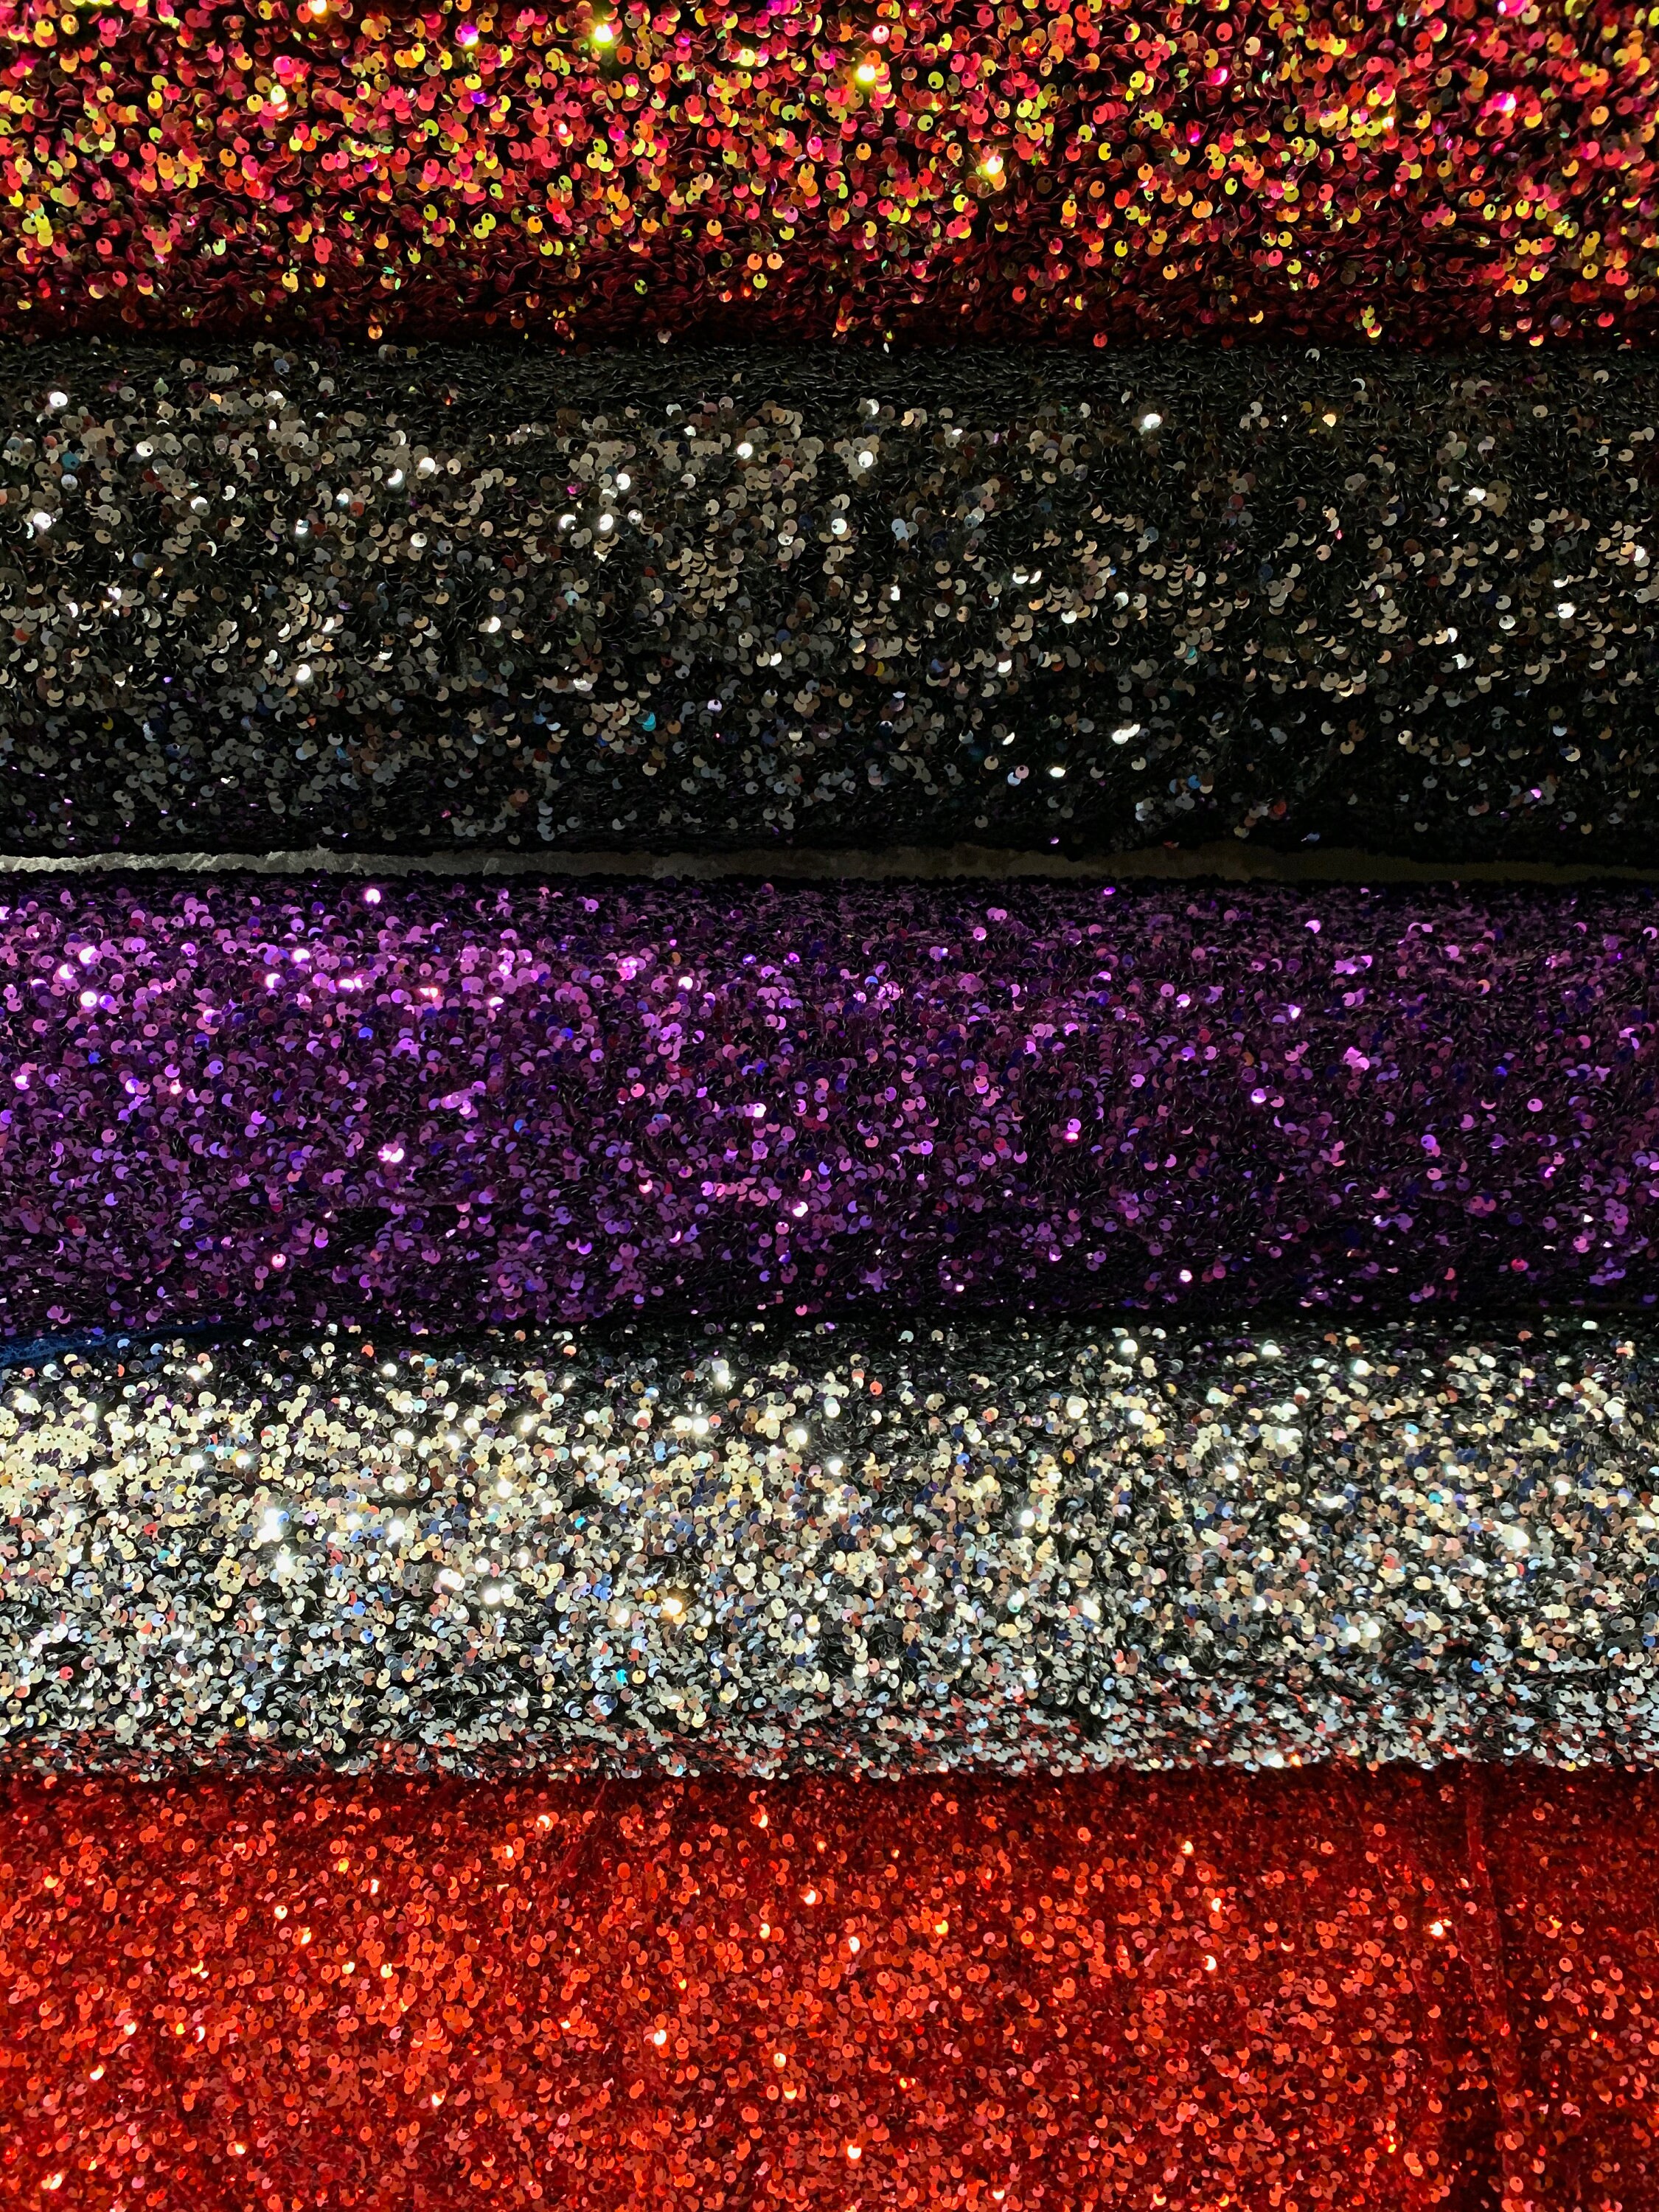  FUHSY Red Sequin Fabric Stretch Big Sequins Velvet